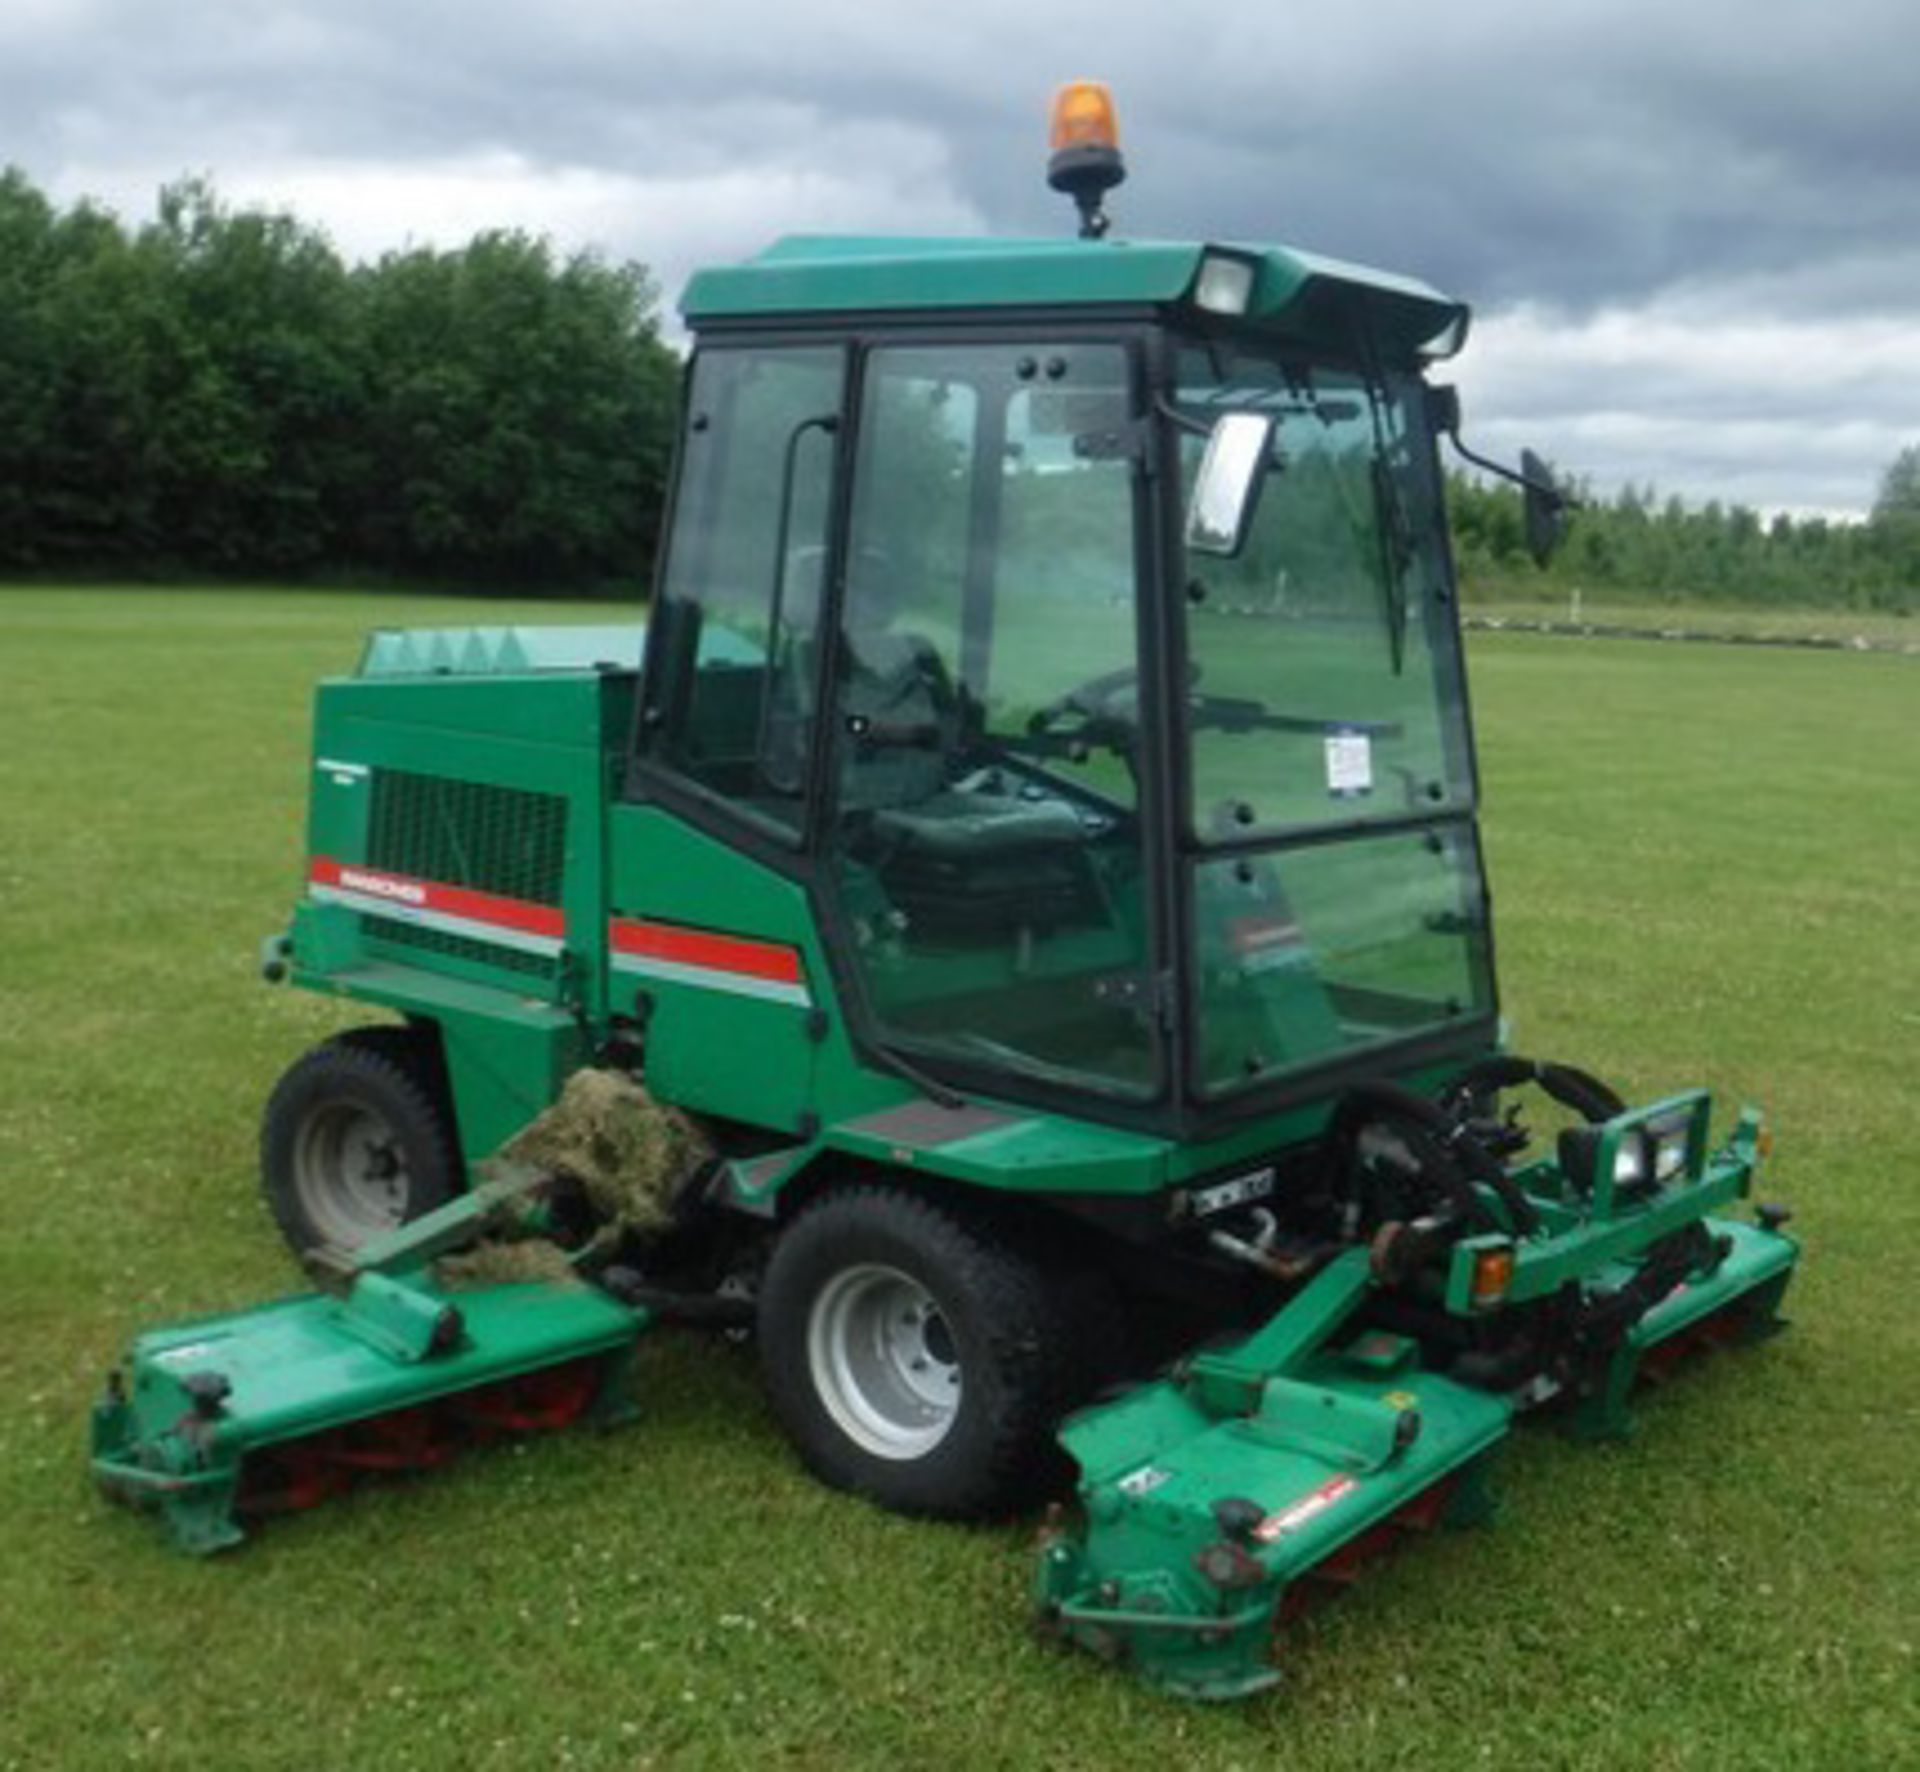 2003 RANSOMES 5 Gang ride on mower. Reg No SN03HLD. 4407hrs (correct) c/w Ransomes safety cab - Image 22 of 34